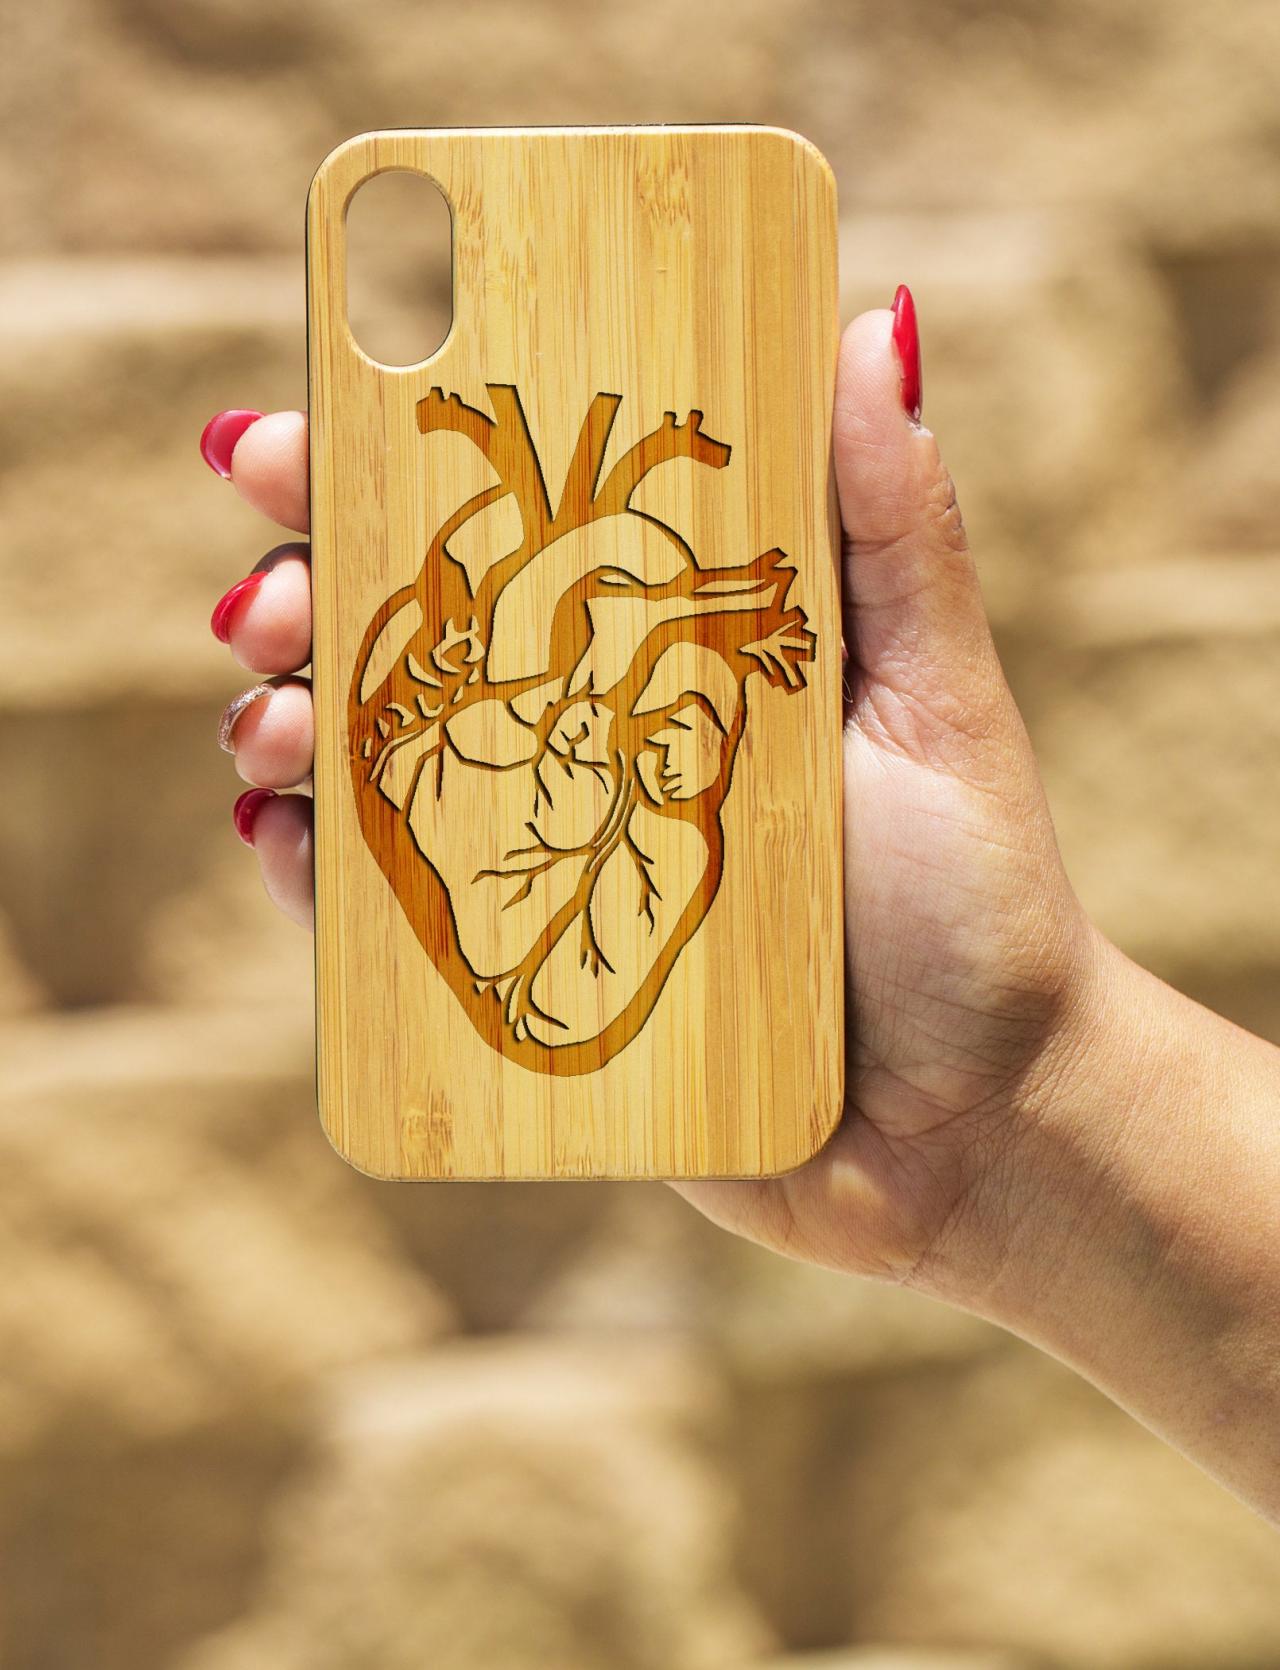 Anatomy Heart IPhone X Case, Engraved Iphone X case, Wooden Engraved Iphone X Case, Iphone case, Beautiful Gift for here, unique case, love